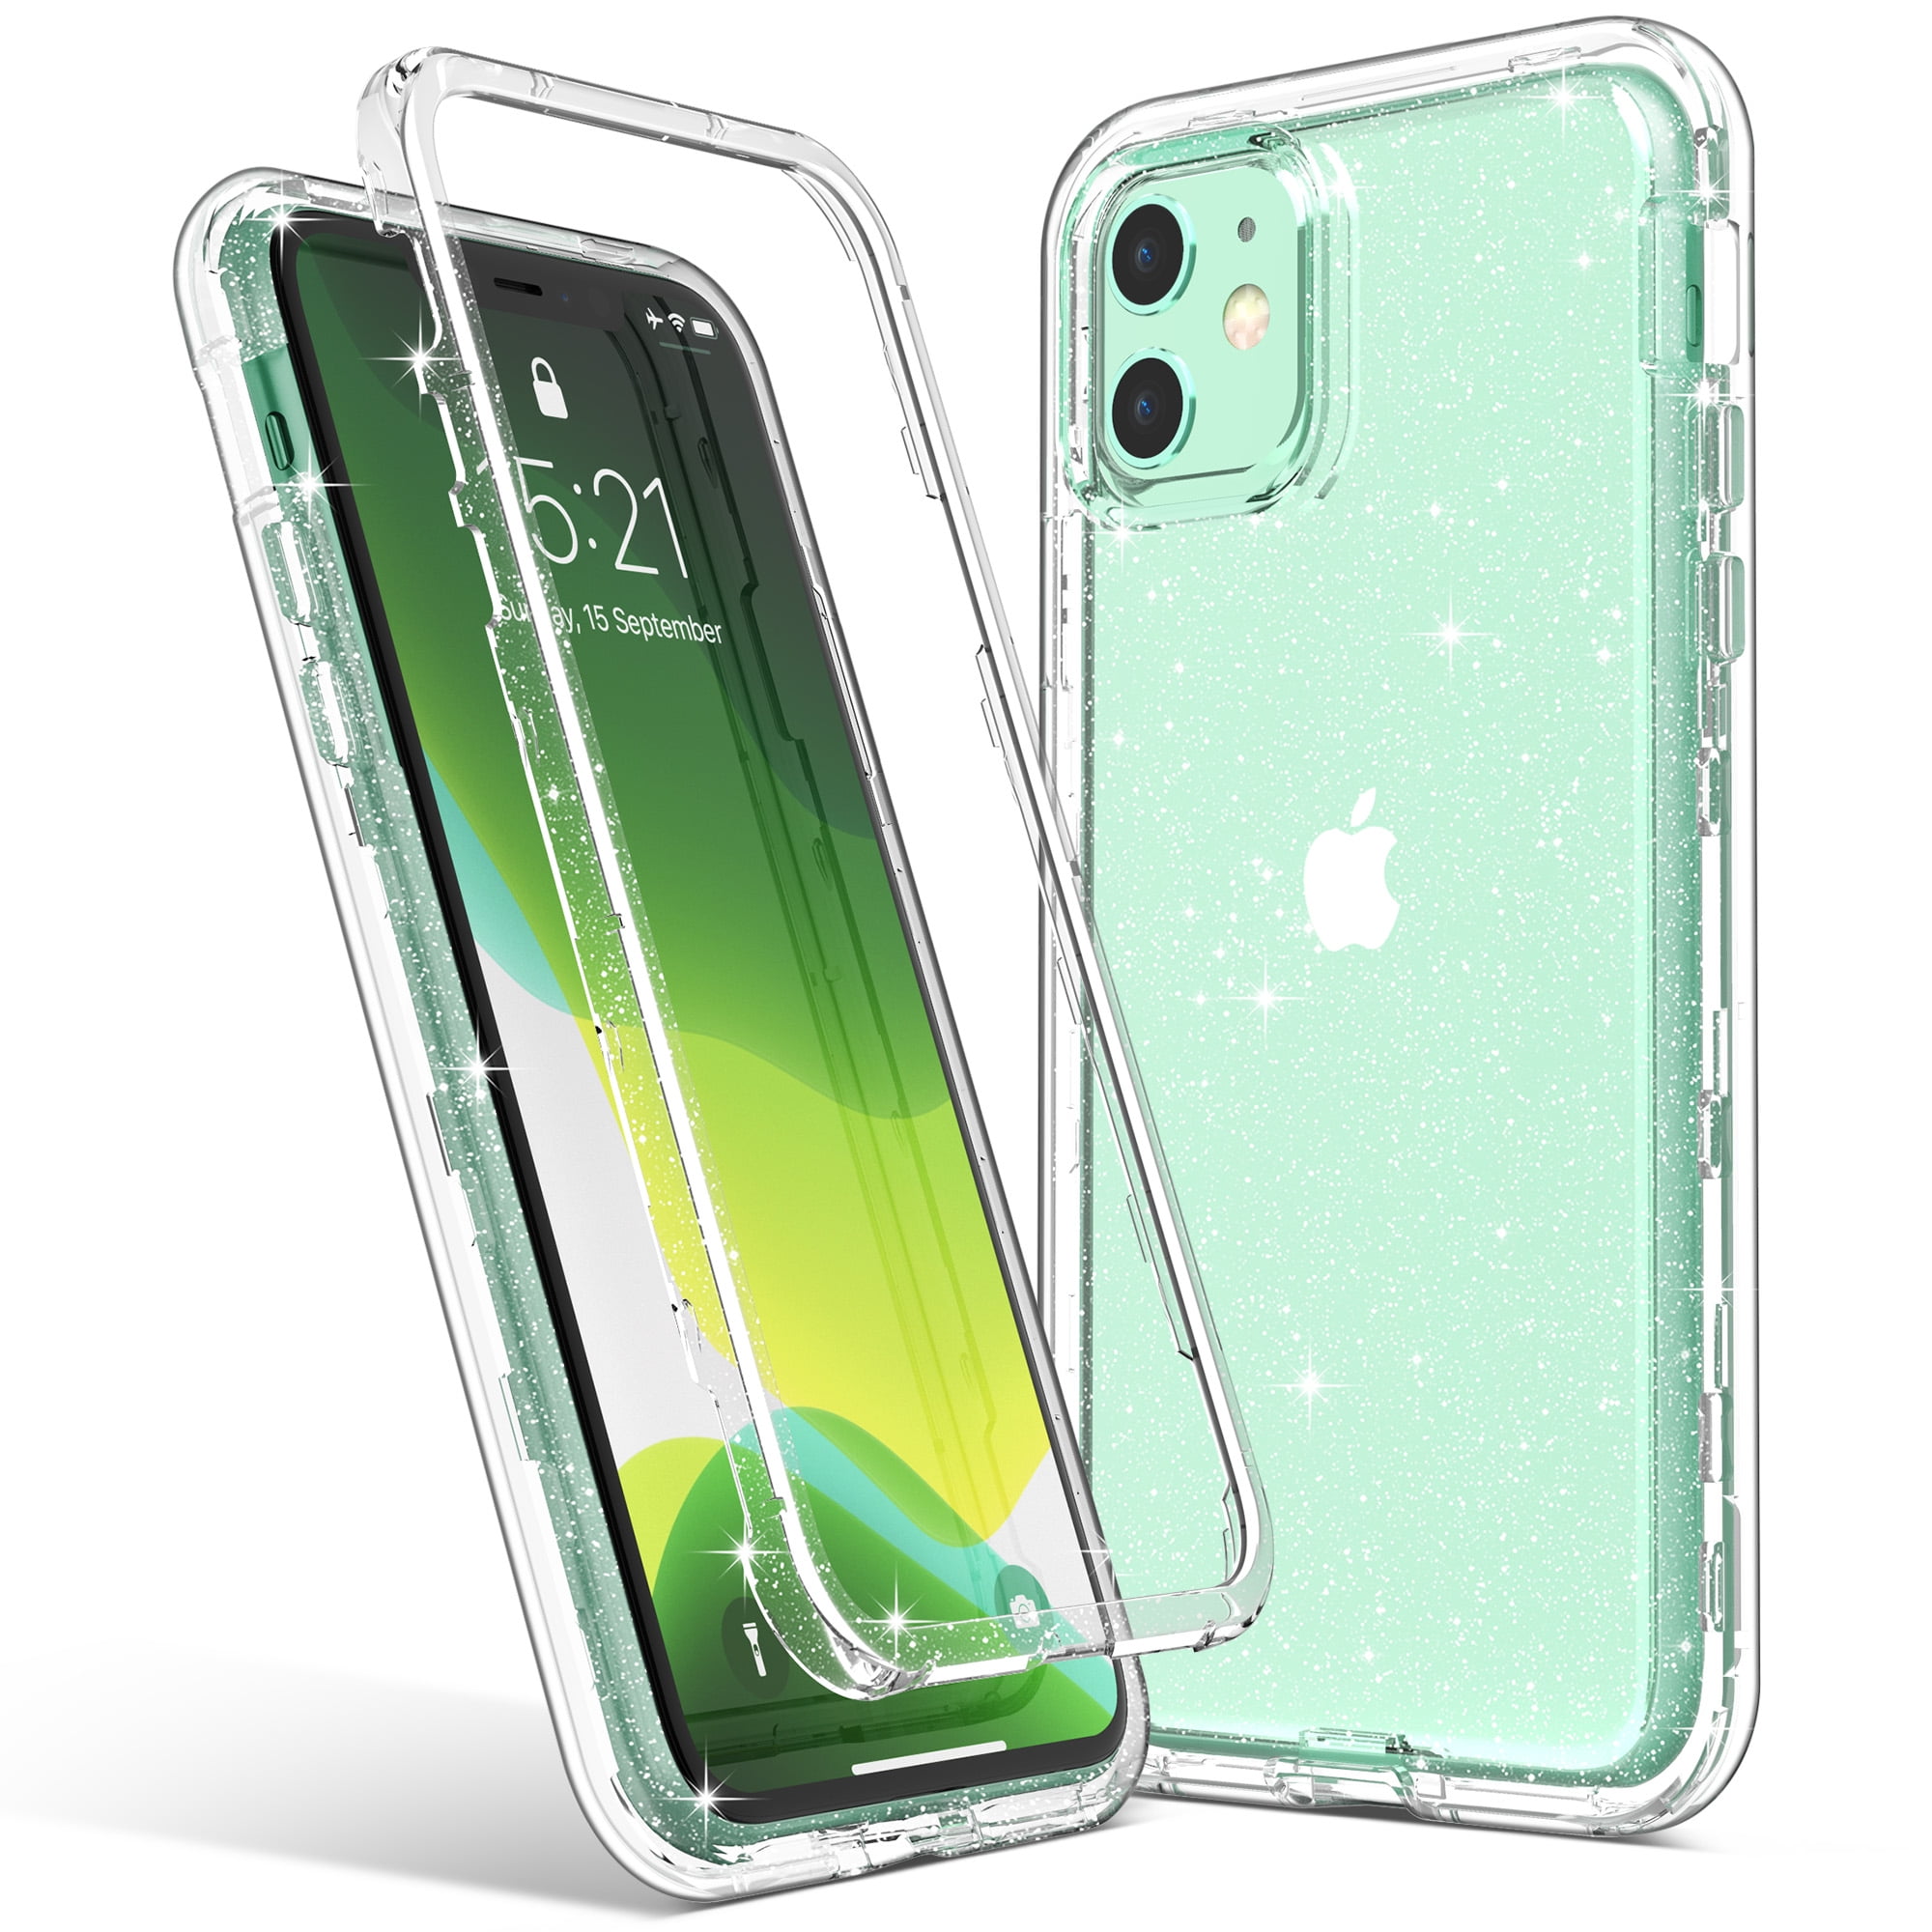  KOLHUBI Clear Phone Case for iPhone 11 Designer Alpaca Art-29  Exquisite Pattern Design Shock-Resistant Anti-Fall Protective Transparent  Shell for iPhone 11 : Cell Phones & Accessories